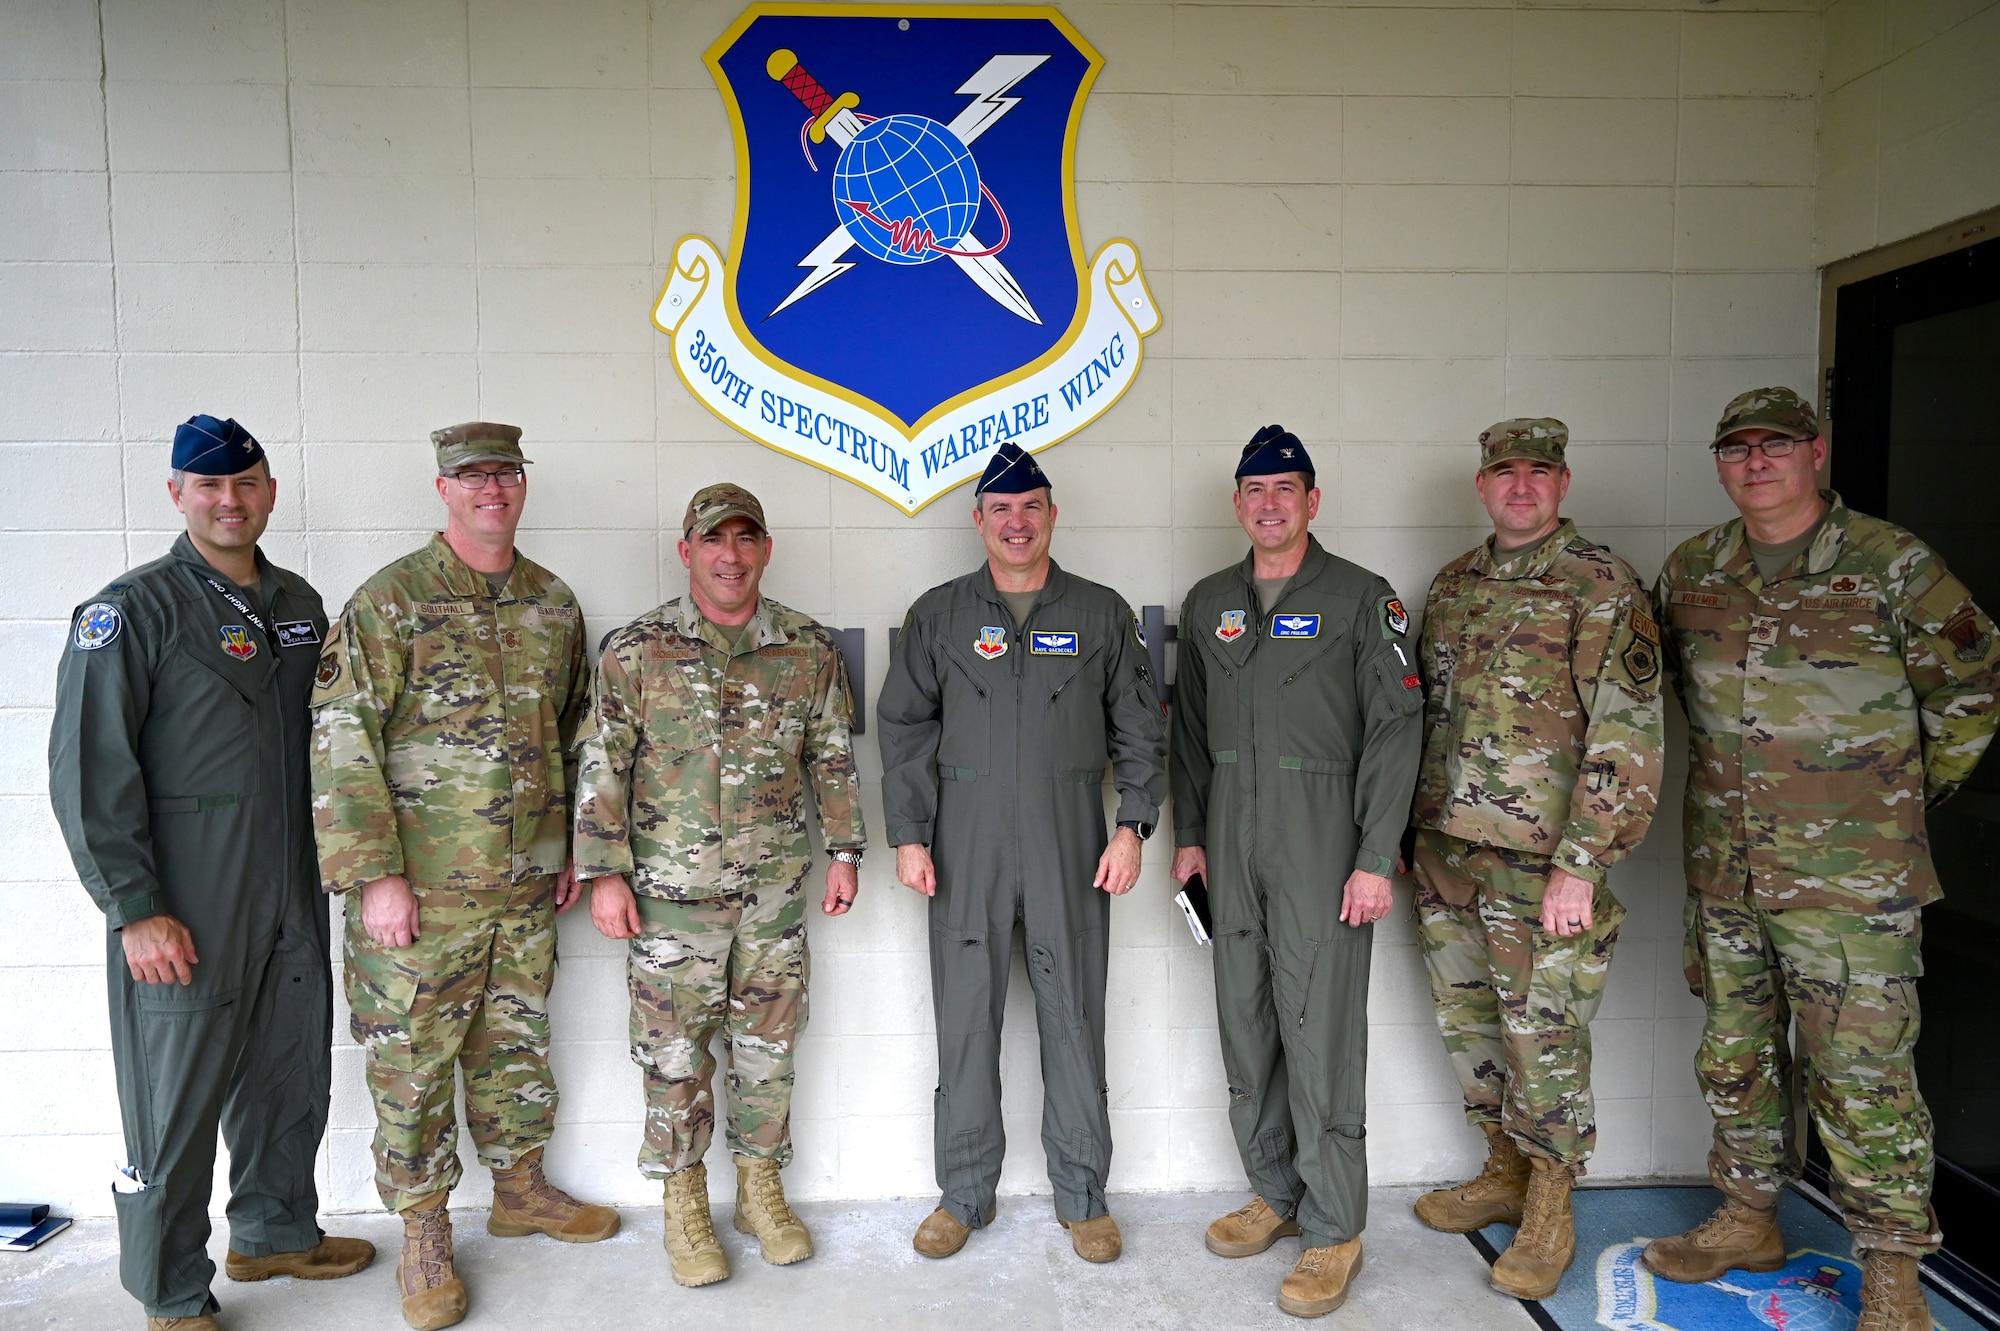 U.S. Air Force Maj. Gen. David Gaedecke, 16th Air Forces (Air Forces Cyber) vice commander, center, poses with leadership from the 350th Spectrum Warfare Wing during a visit at Eglin Air Force Base, Fla., March 1, 2023. Gaedecke visited to see how the wing's missions are providing the Combat Air Force with the electronic warfare capabilities needed to win. (U.S. Air Force photo by 1st Lt. Benjamin Aronson)